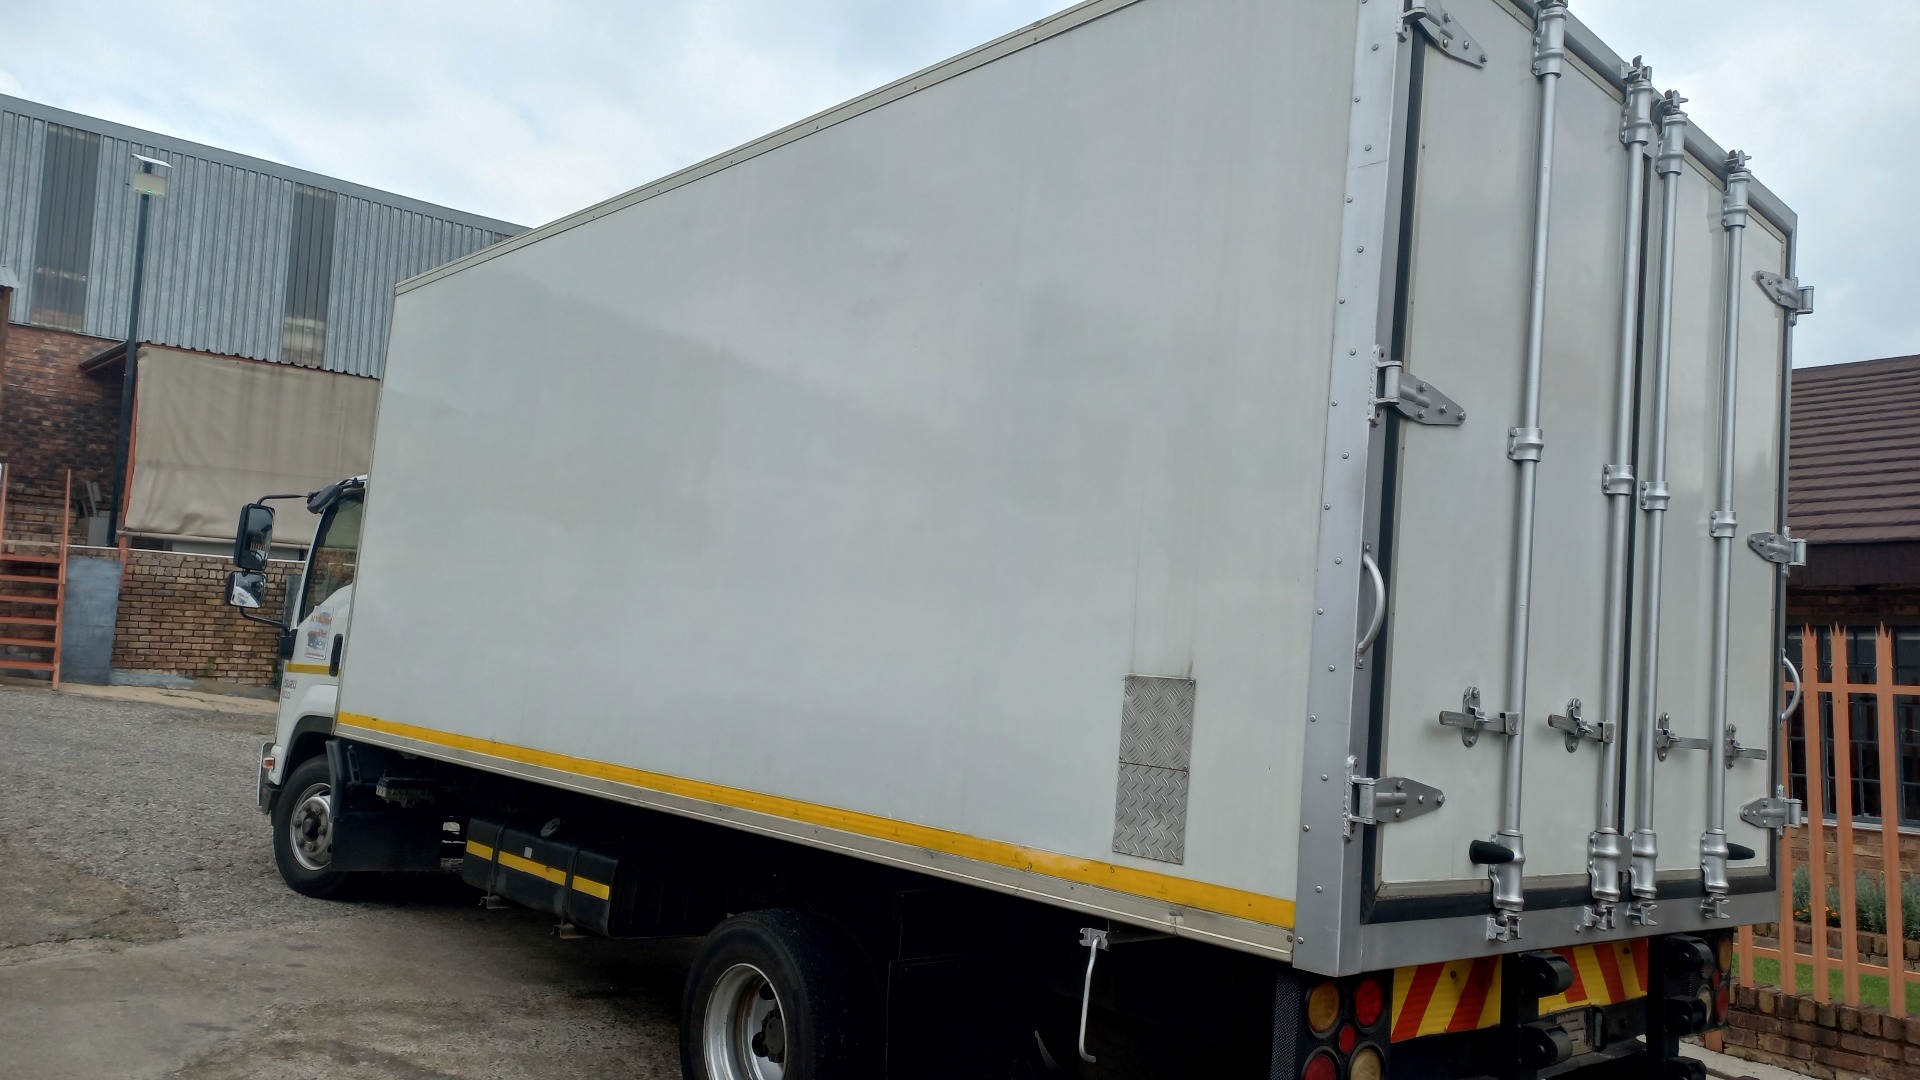 Isuzu Refrigerated trucks FRR600 AMT 6 TON 2016 for sale by A to Z TRUCK SALES | Truck & Trailer Marketplace